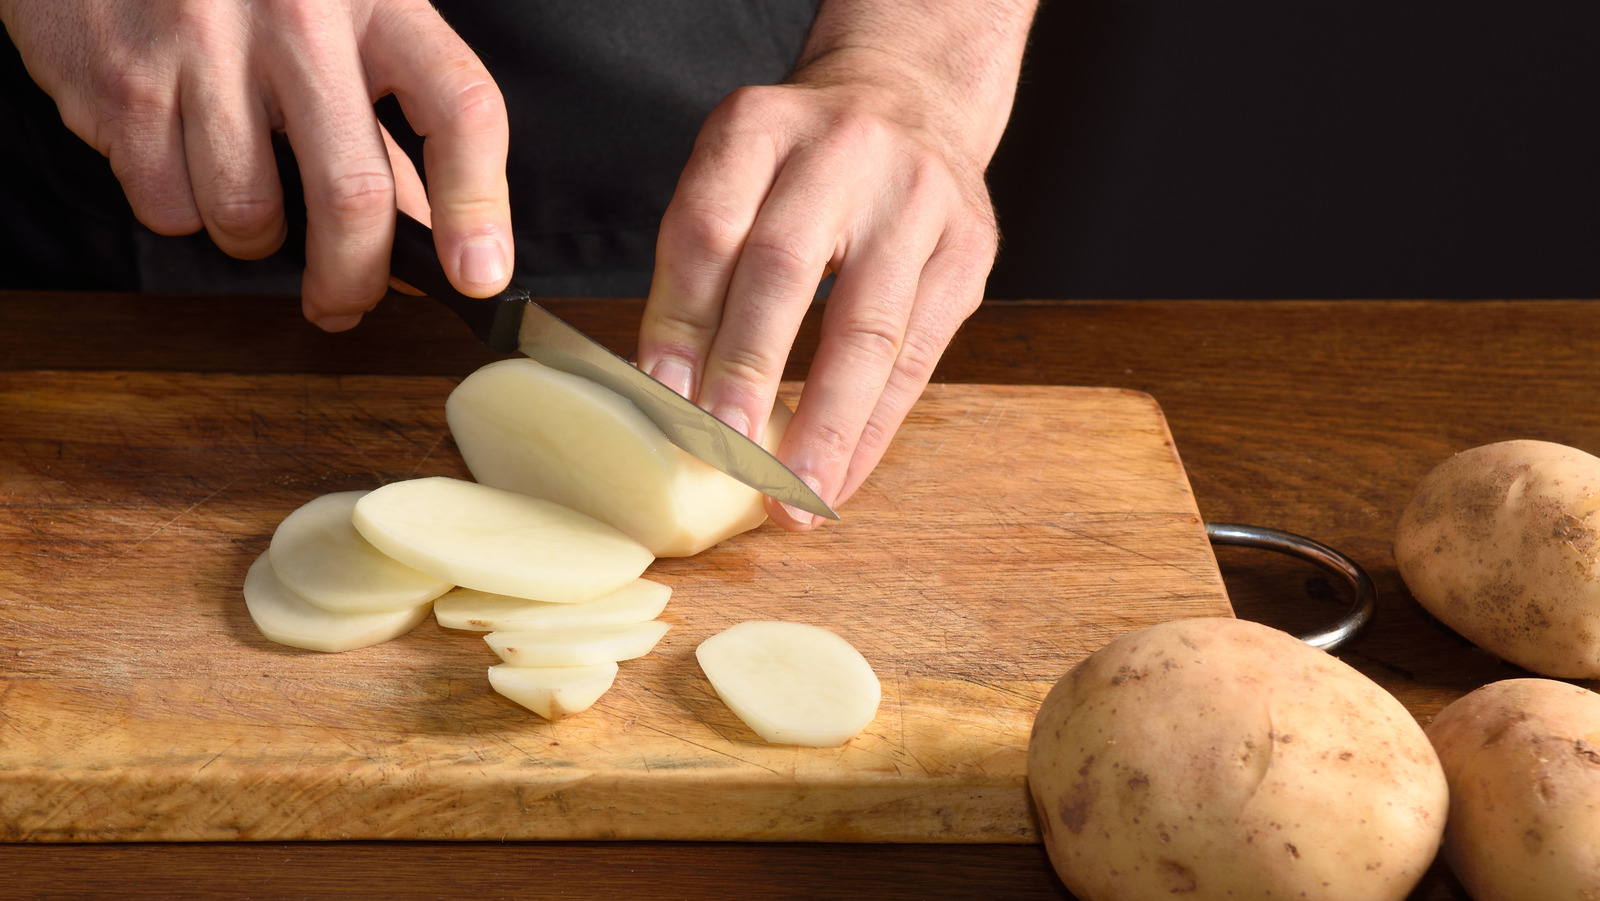 https://www.tastingtable.com/img/gallery/15-tips-you-need-to-make-cutting-potatoes-much-easier/l-intro-1685645600.jpg